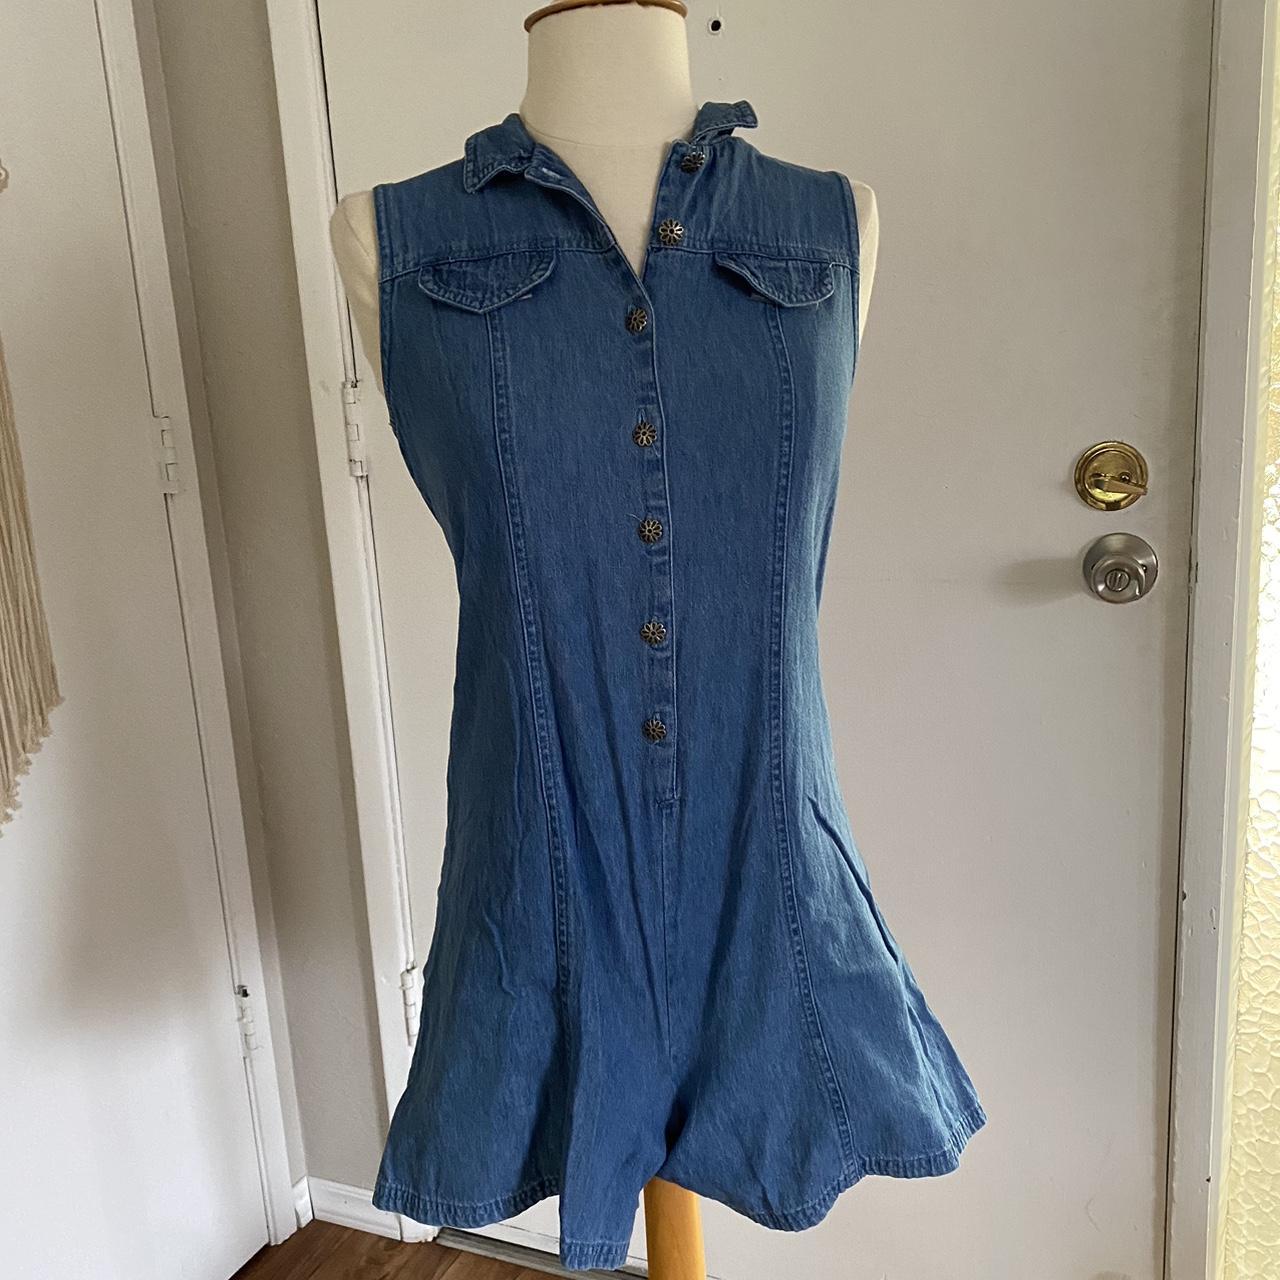 Denim romper with daisy buttons from “Christie... - Depop